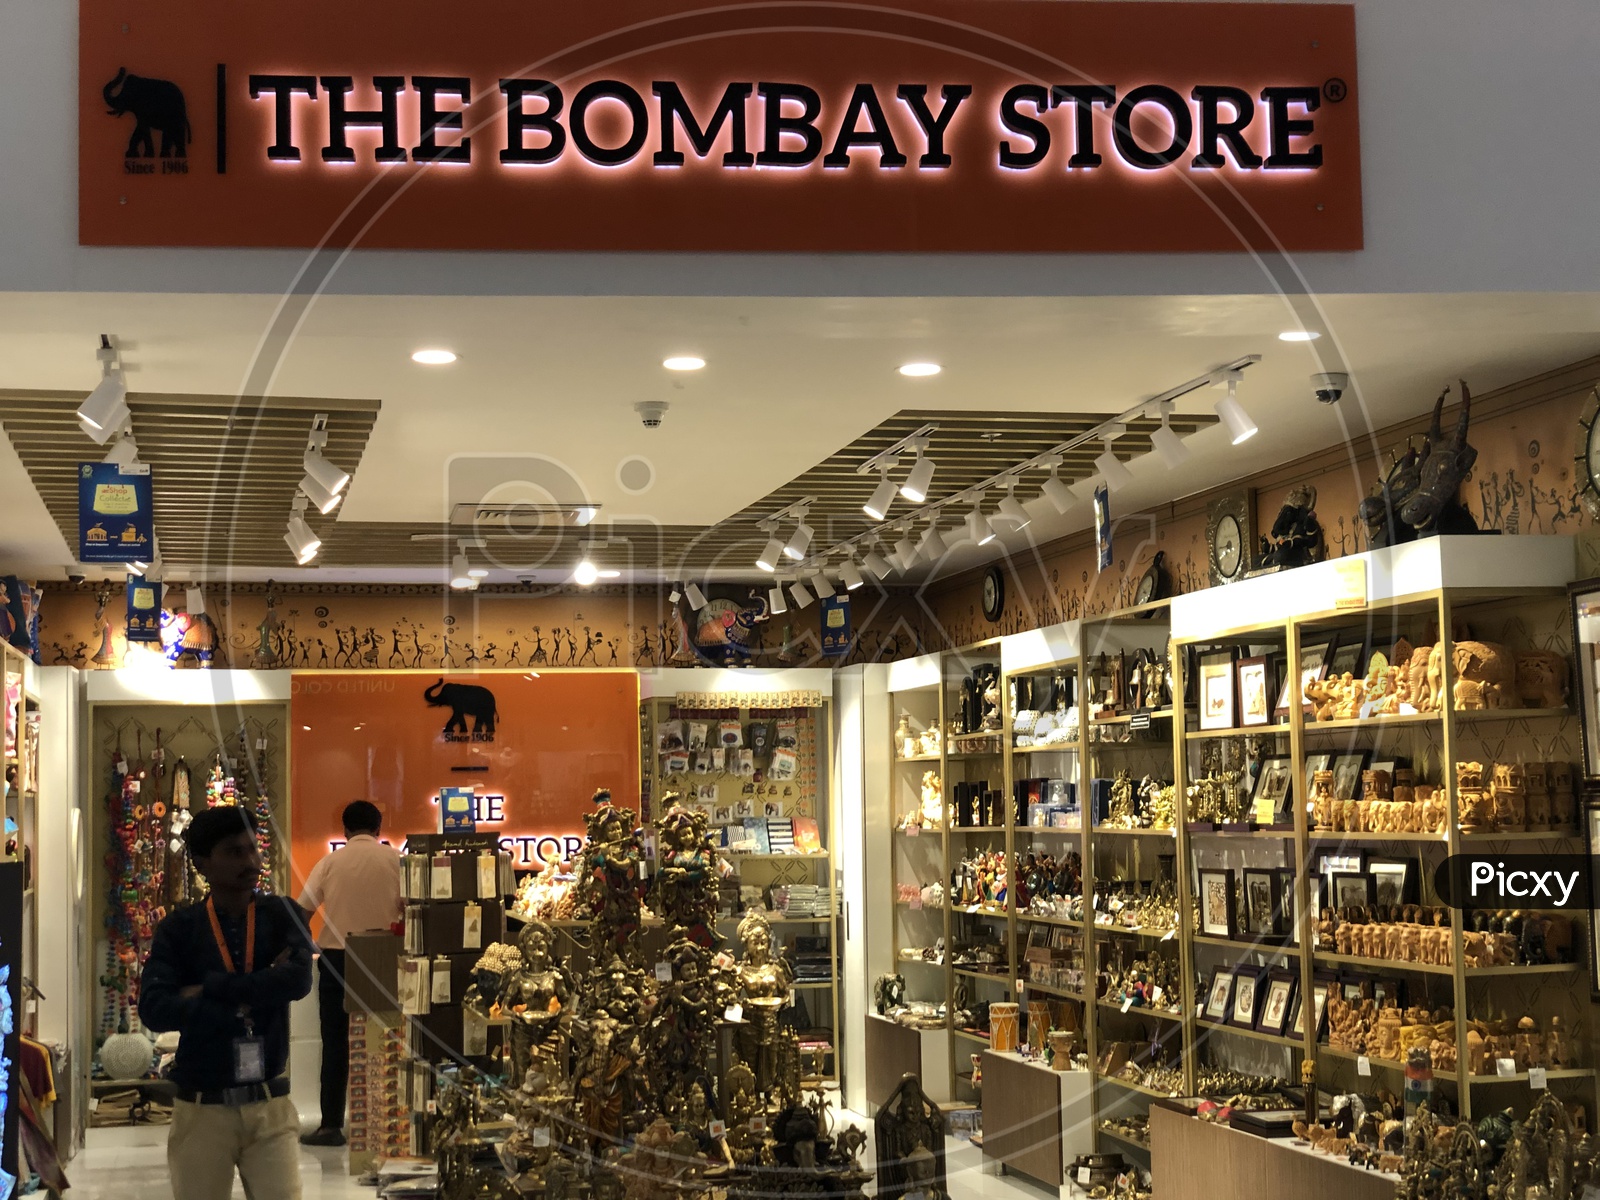 The Bombay store